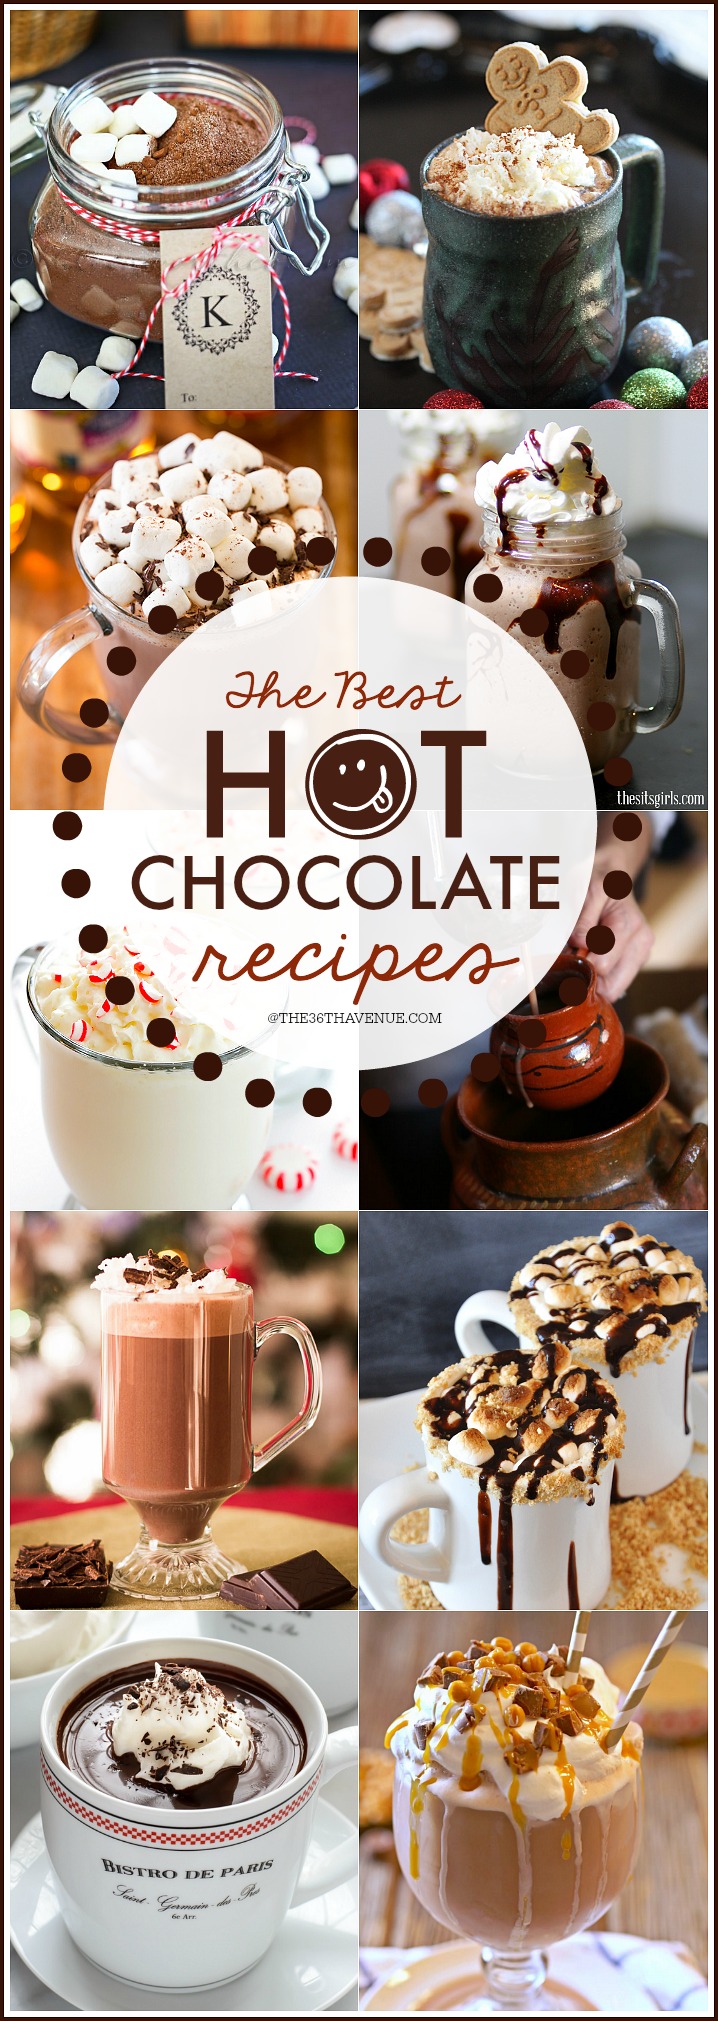 THE BEST HOT CHOCOLATE RECIPES- It's the season for Hot Chocolate and here you'll find the best Hot Chocolate Recipes. We have everything in this delicious menu: White Hot Chocolate, Frozen Hot Chocolate, Mexican Hot Chocolate, Slow Cooker Hot Chocolate, we even have Eggnog Hot Chocolate! These 20 Homemade Hot Chocolate Recipes for sure will bring warmth into your home in those chilly cold days! Ready to see them all? PIN IT NOW and make them later!